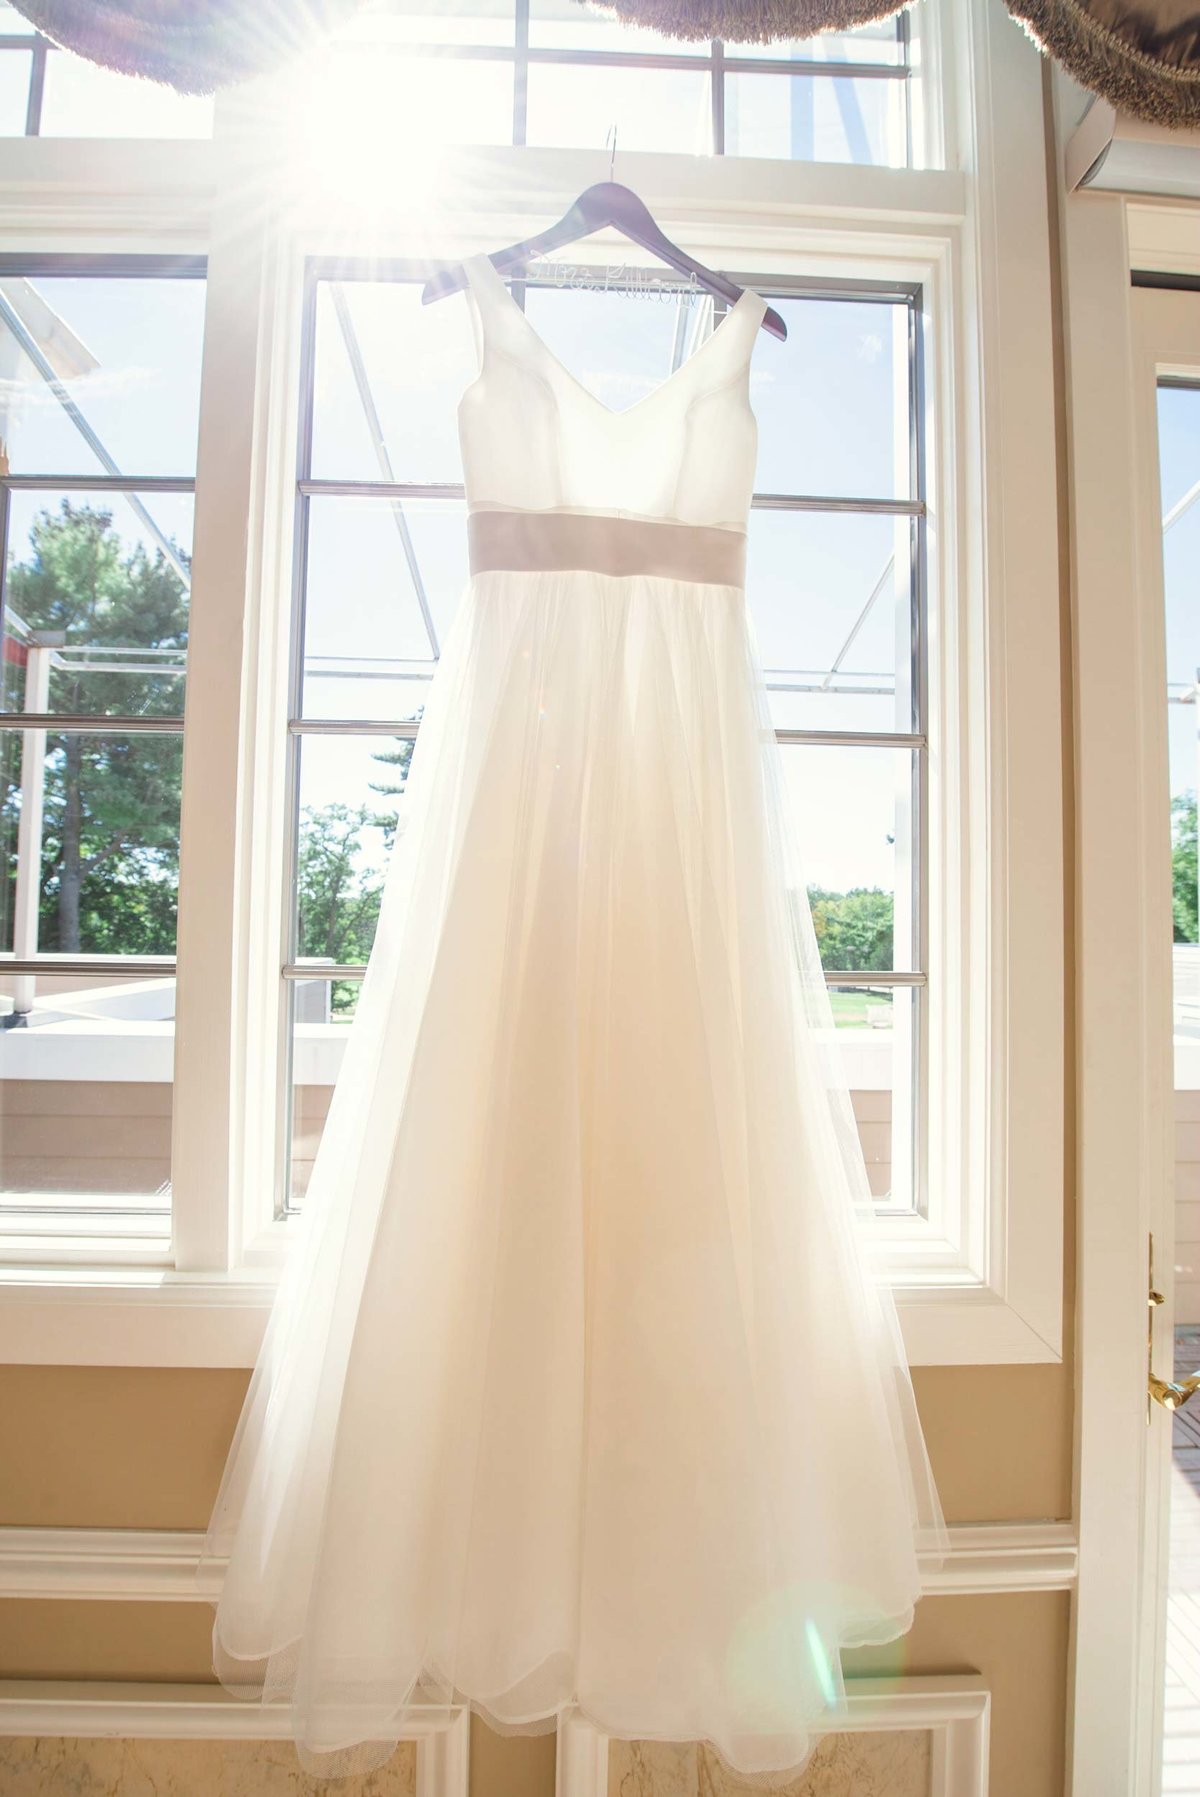 Bride's dress in window with light shining from behind at Stonebridge Country Club